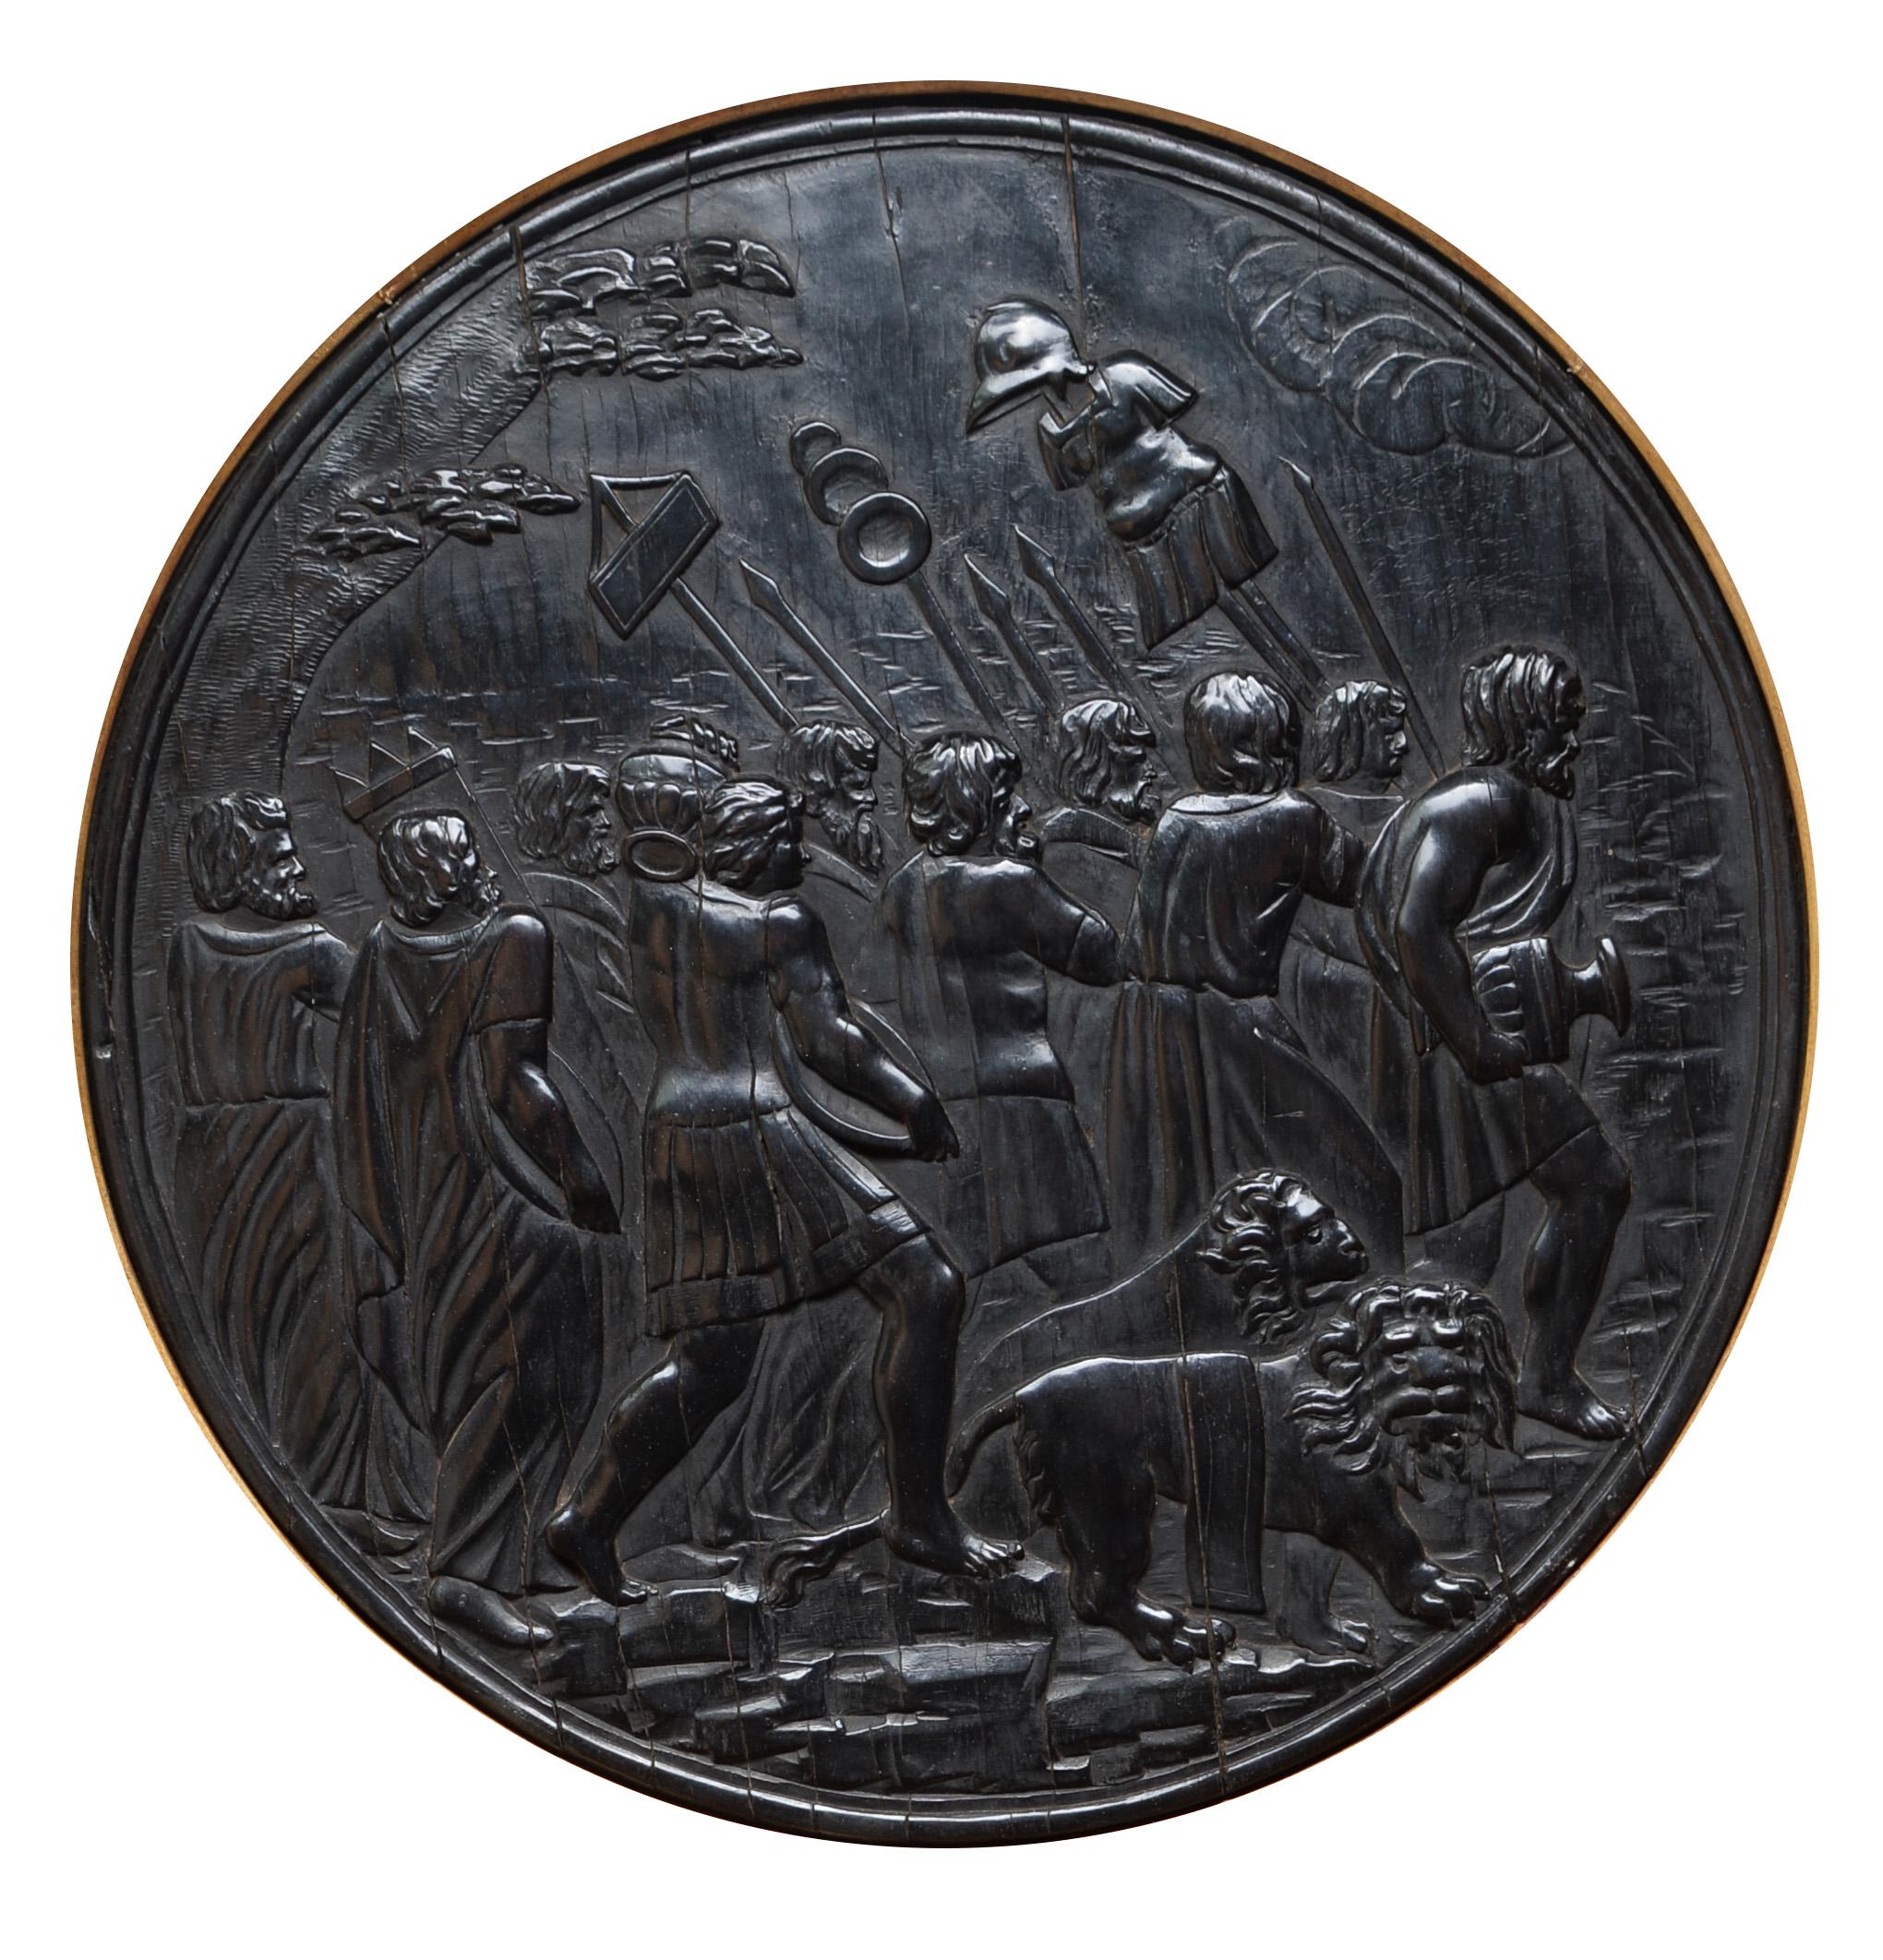 Each ebony tondo carved with Roman military scenes in low relief, set in gilt Florentine style frames. Formerly part of the front doors of a cabinet. With an old label at the back of the frame, Ernest Samson, Paris.
13 1/4in. diameter sight (the